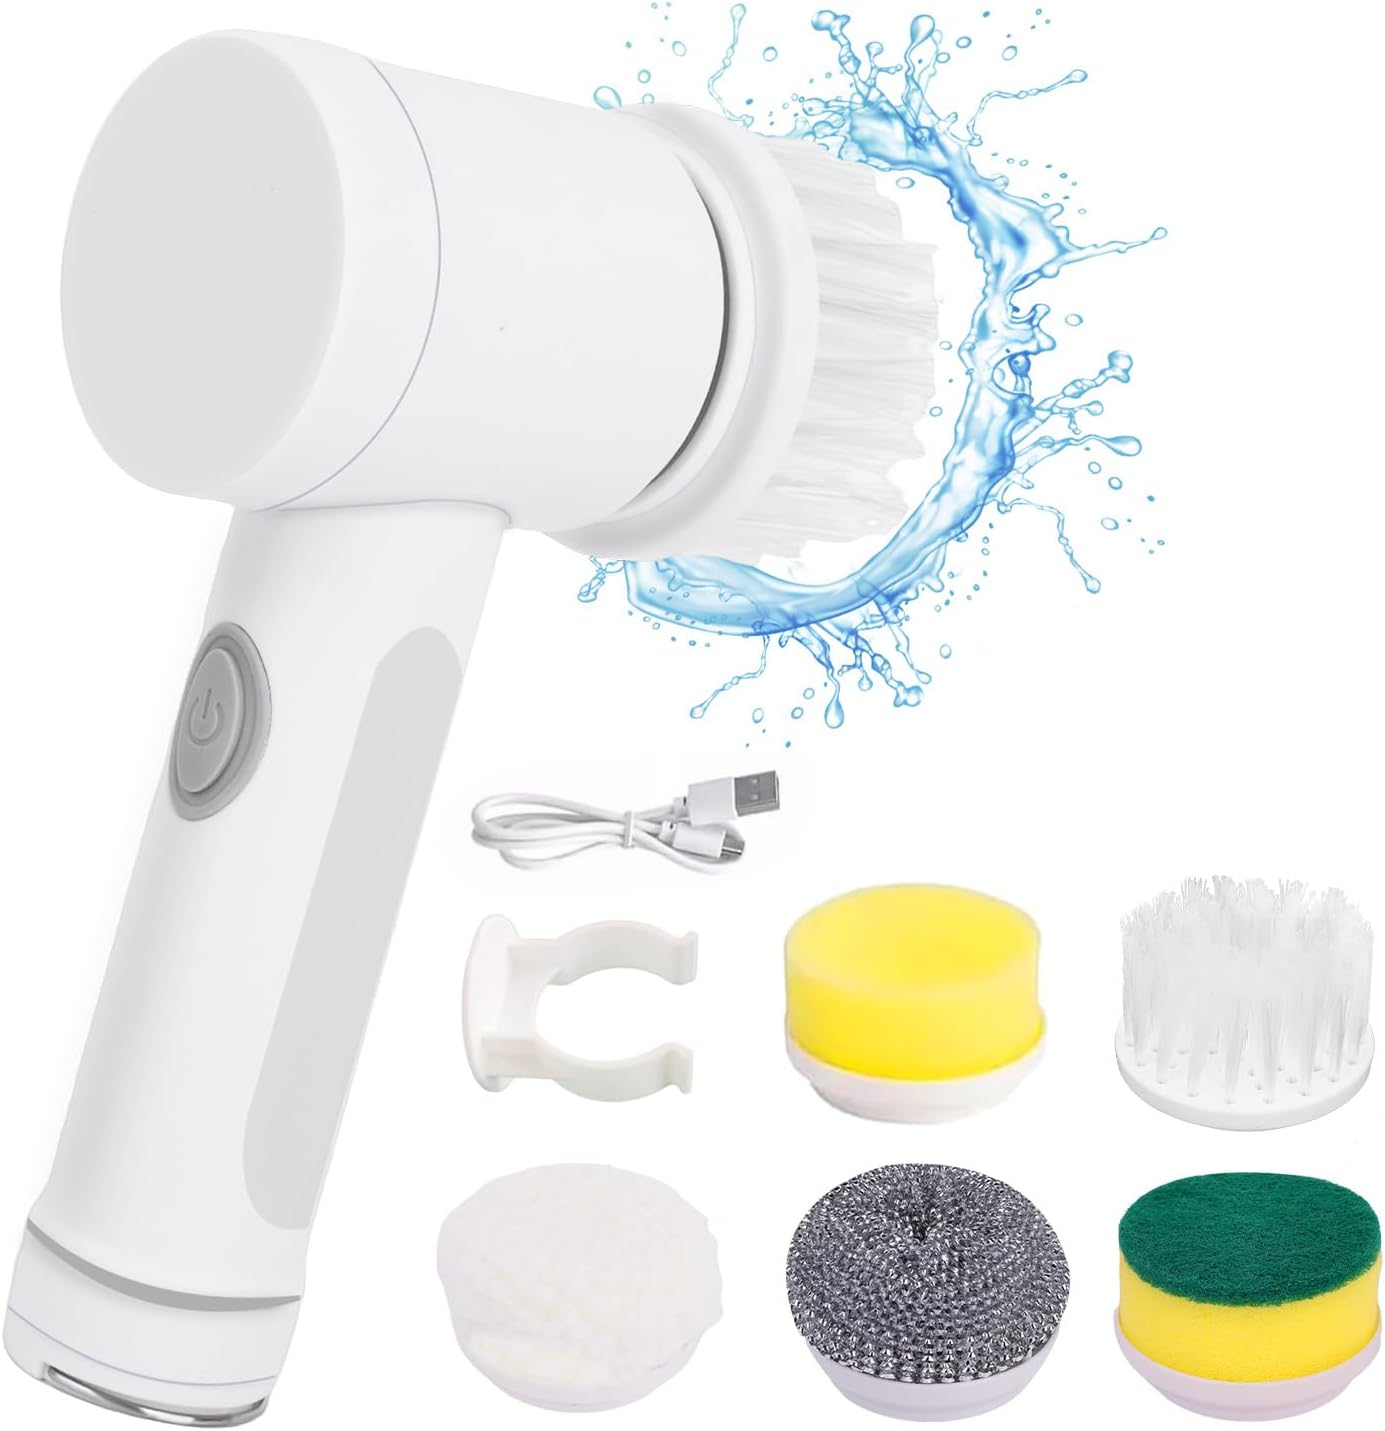 Electric Spin Brush,Spin Scrubber for Cleaning,Cleaning Brush with 5 Replaceable Brush Heads,Handheld Electric Scrubber for Bathtub,Floor,Tile,Stove,Glass,Sink. (White)